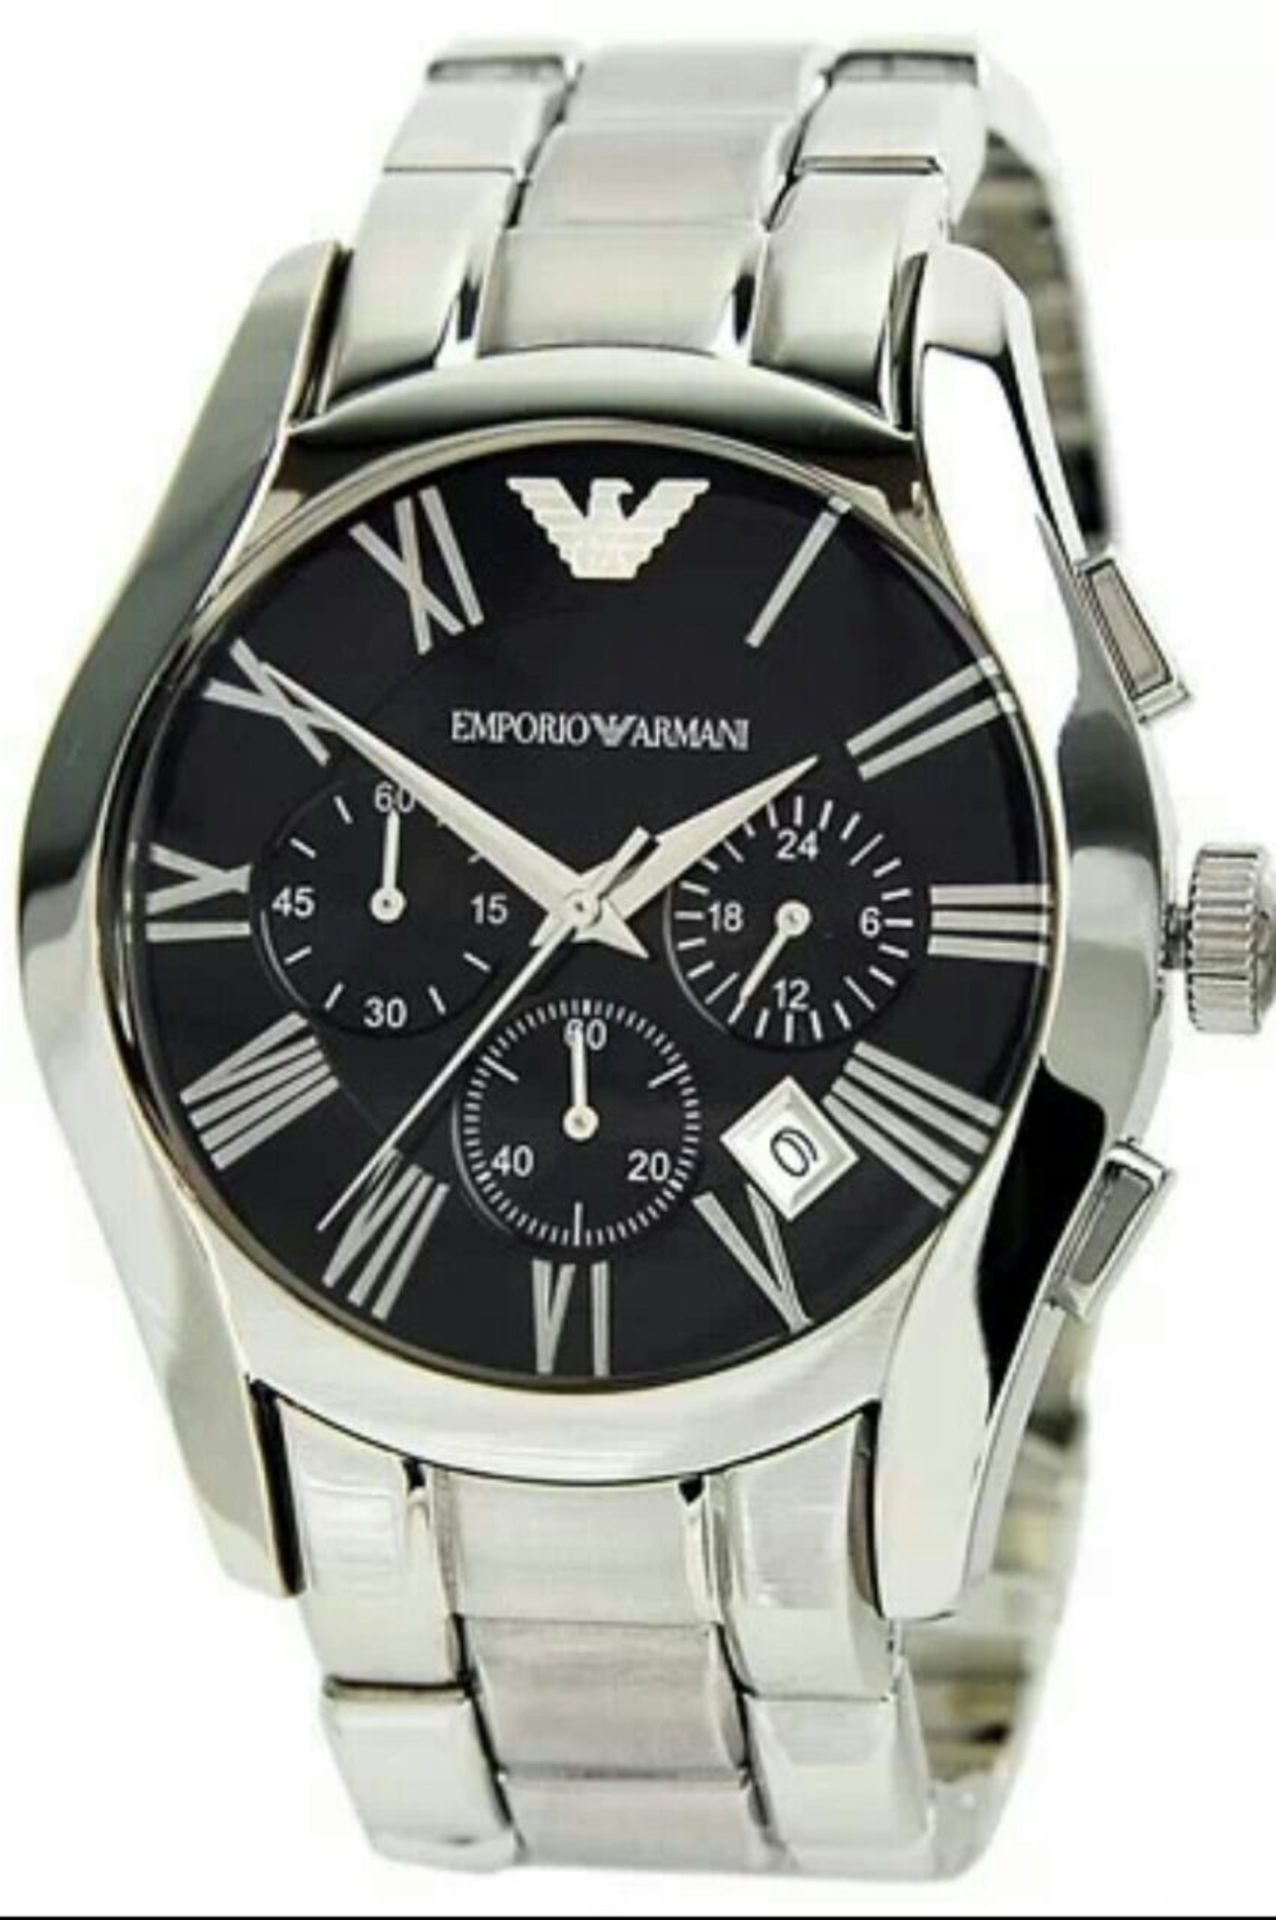 BRAND NEW EMPORIO ARMANI AR0673, GENTS STAINLESS STEEL BRACELET WATCH, WITH A BLACK CIRCULAR